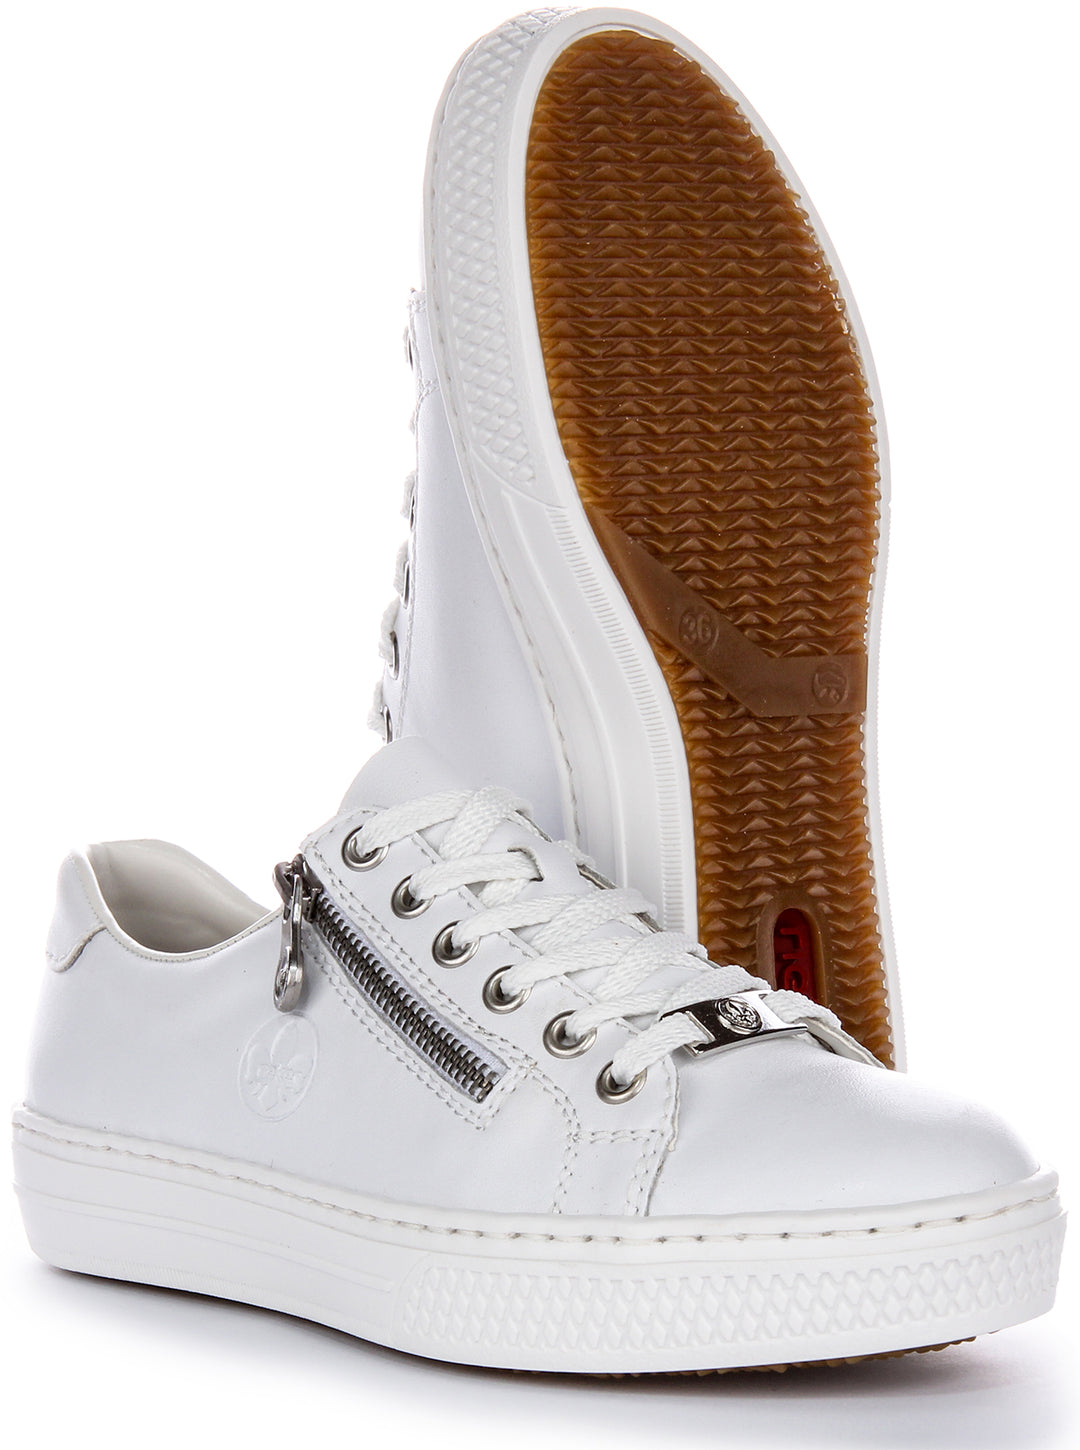 Rieker L59L1-83 In White Trainers For Women